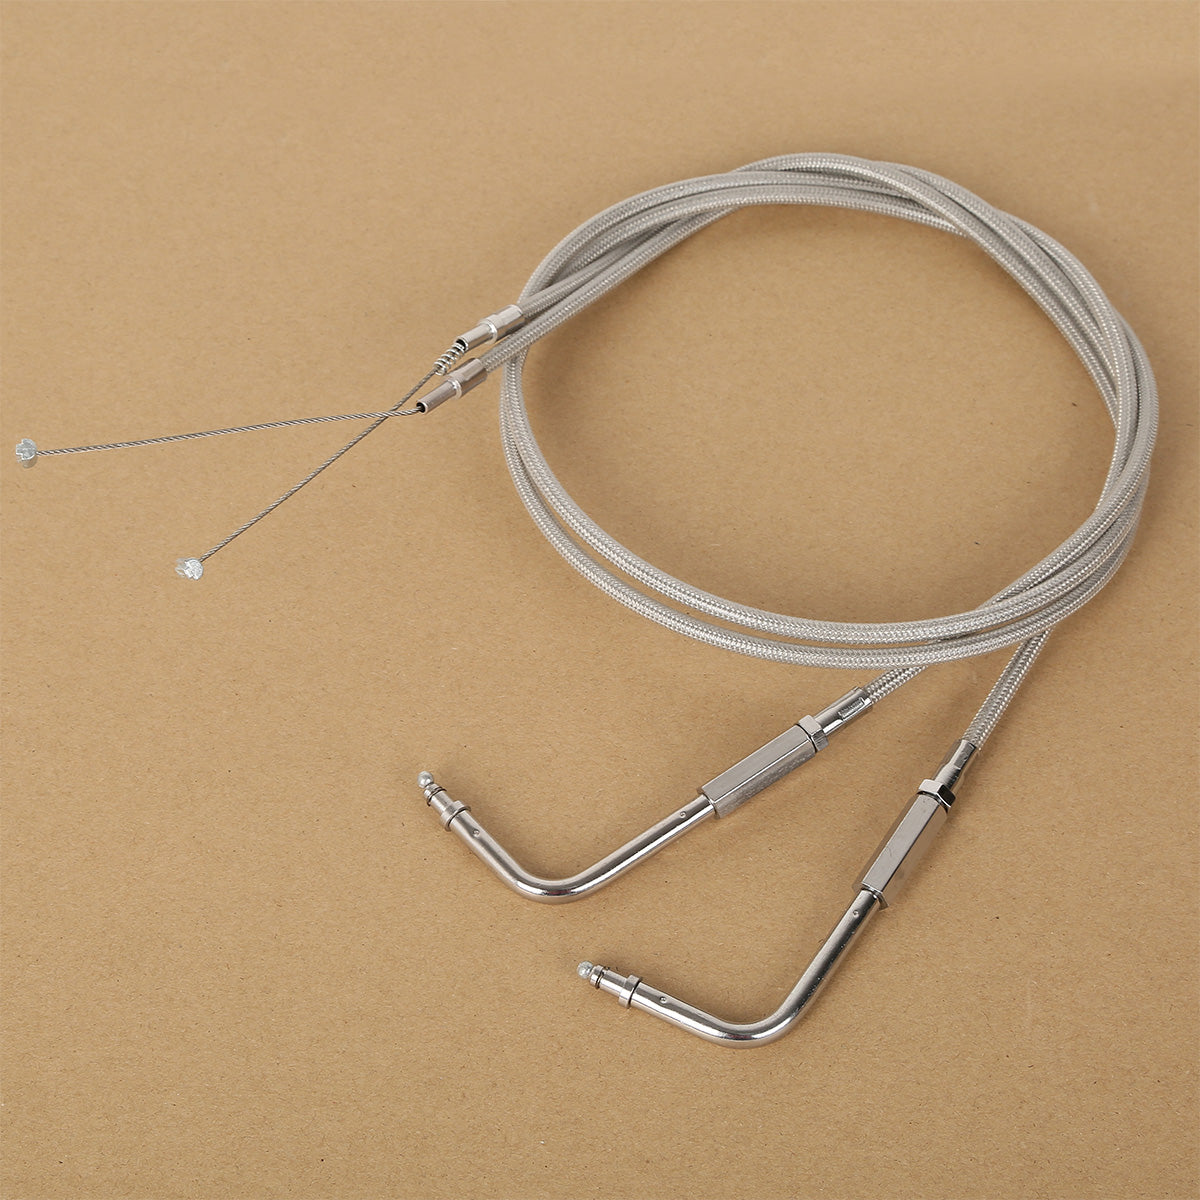 Custom Chrome 110cm Stainless Throttle Cable Wire Set Fit For Harley Touring FLST FXST 1996-10